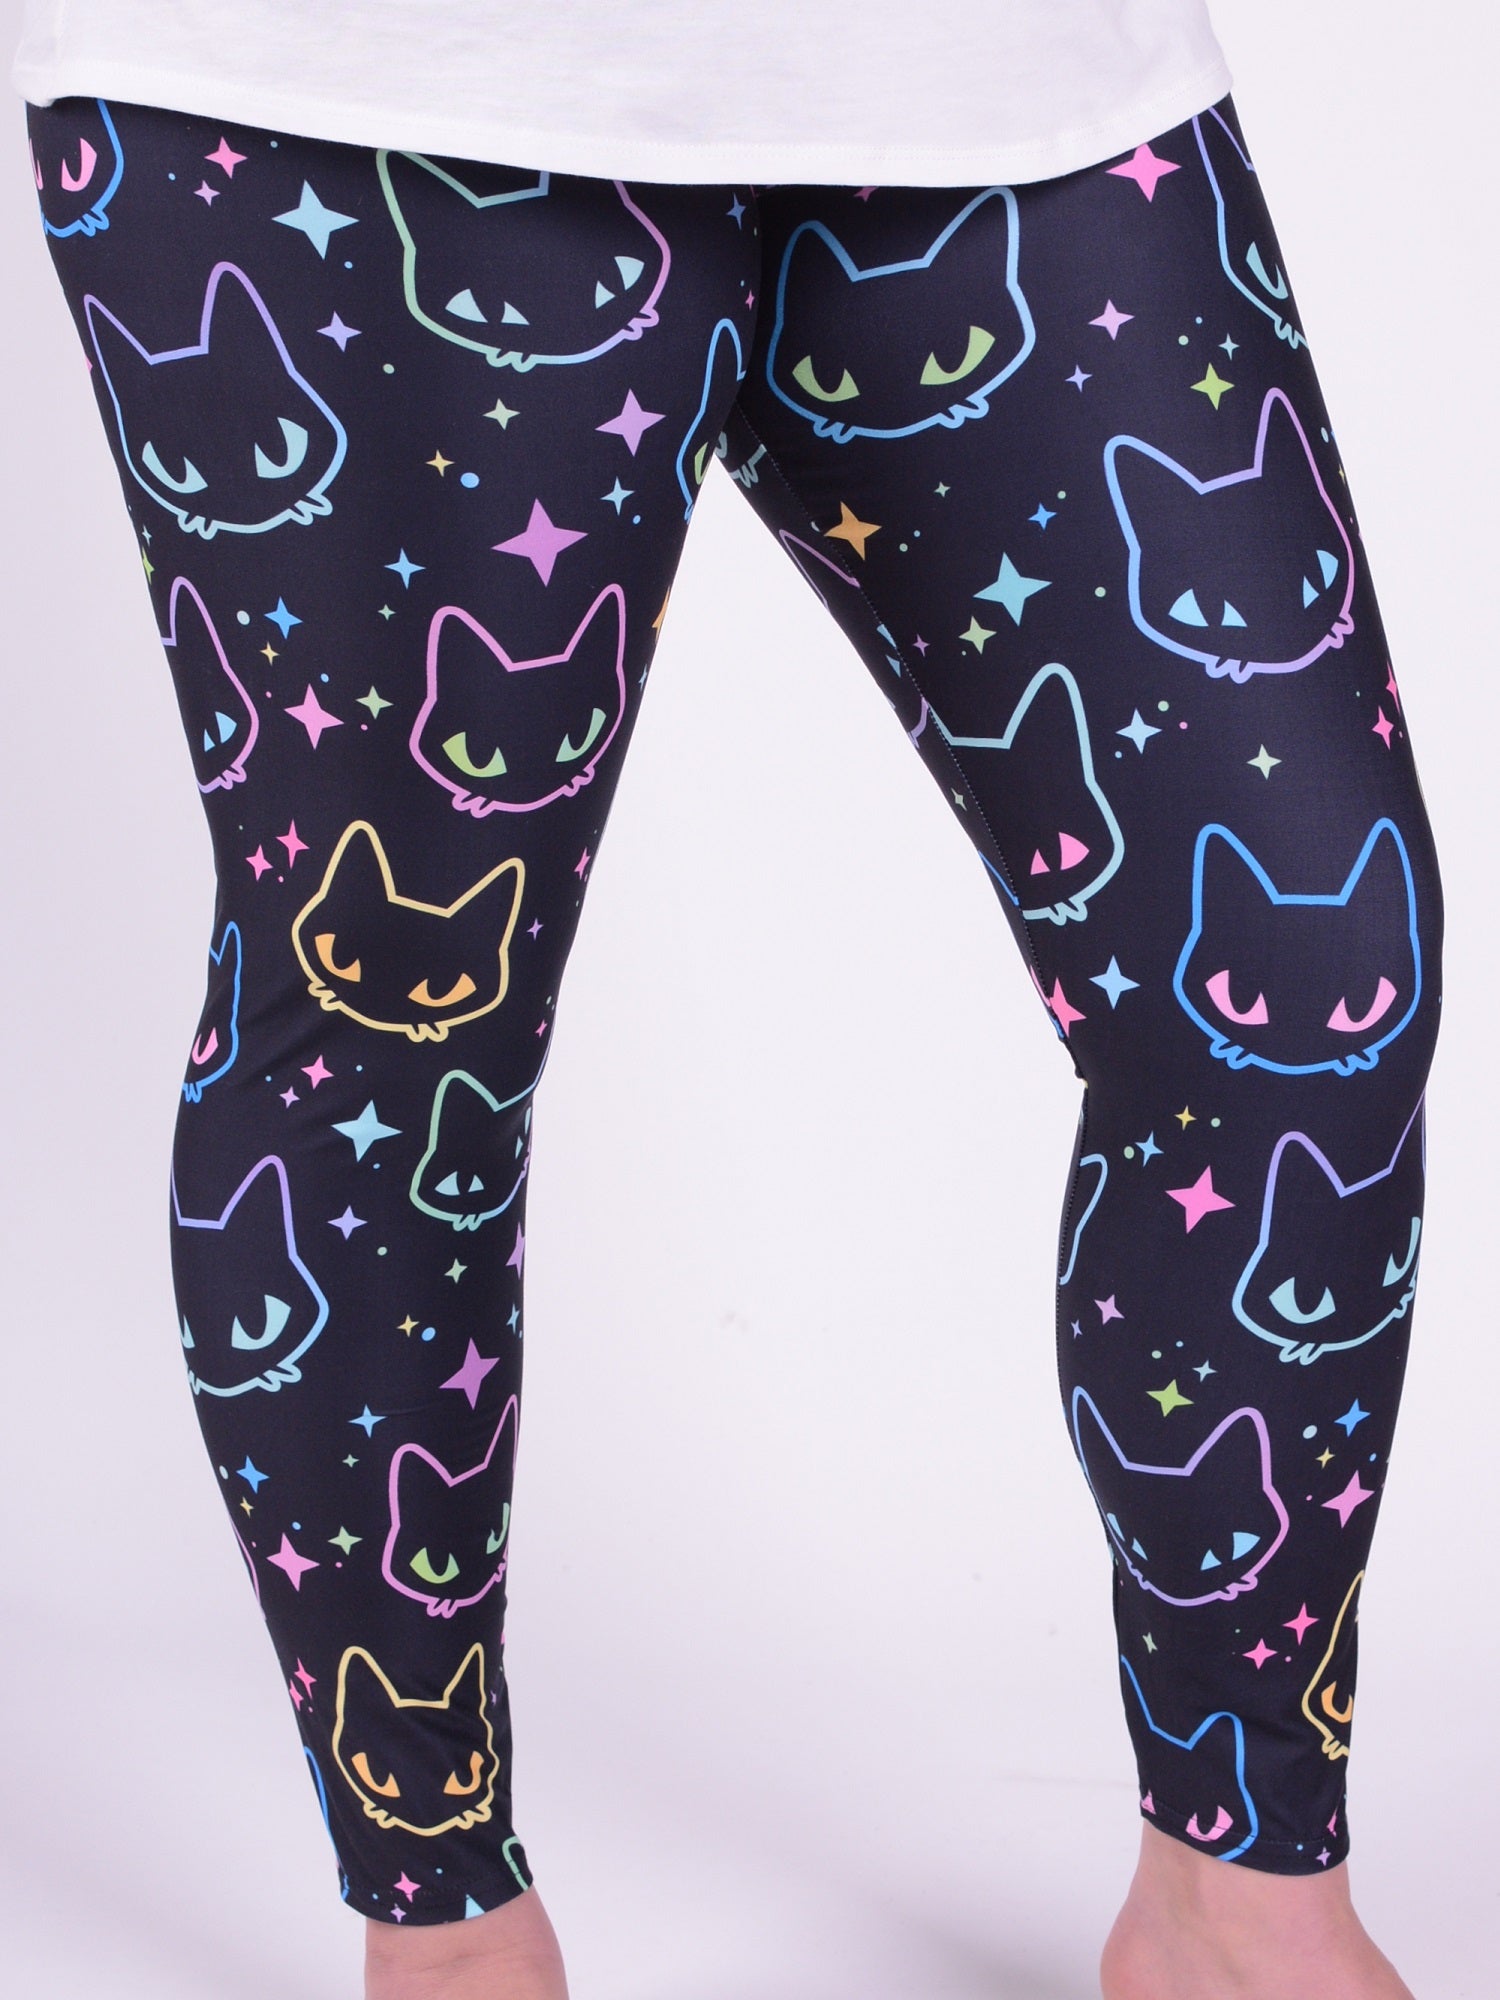 Leggings  - Neon Cats - L54, Trousers, Pure Plus Clothing, Lagenlook Clothing, Plus Size Fashion, Over 50 Fashion